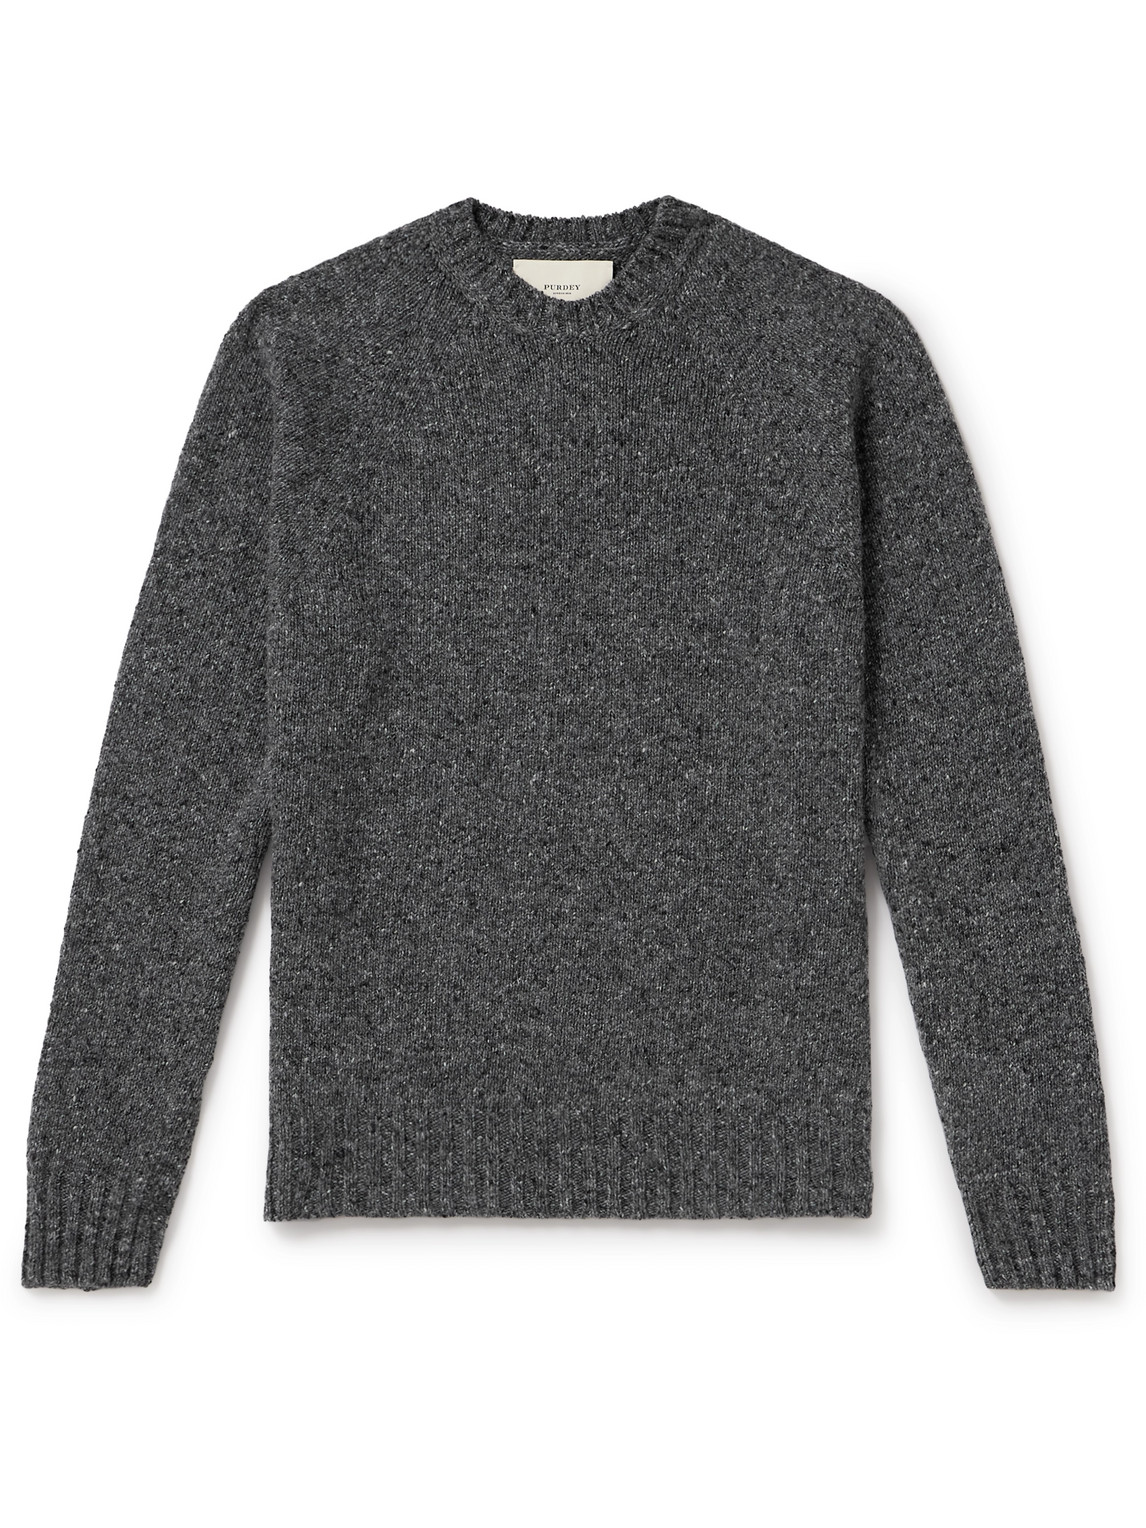 Purdey Cashmere Donegal Sweater In Gray